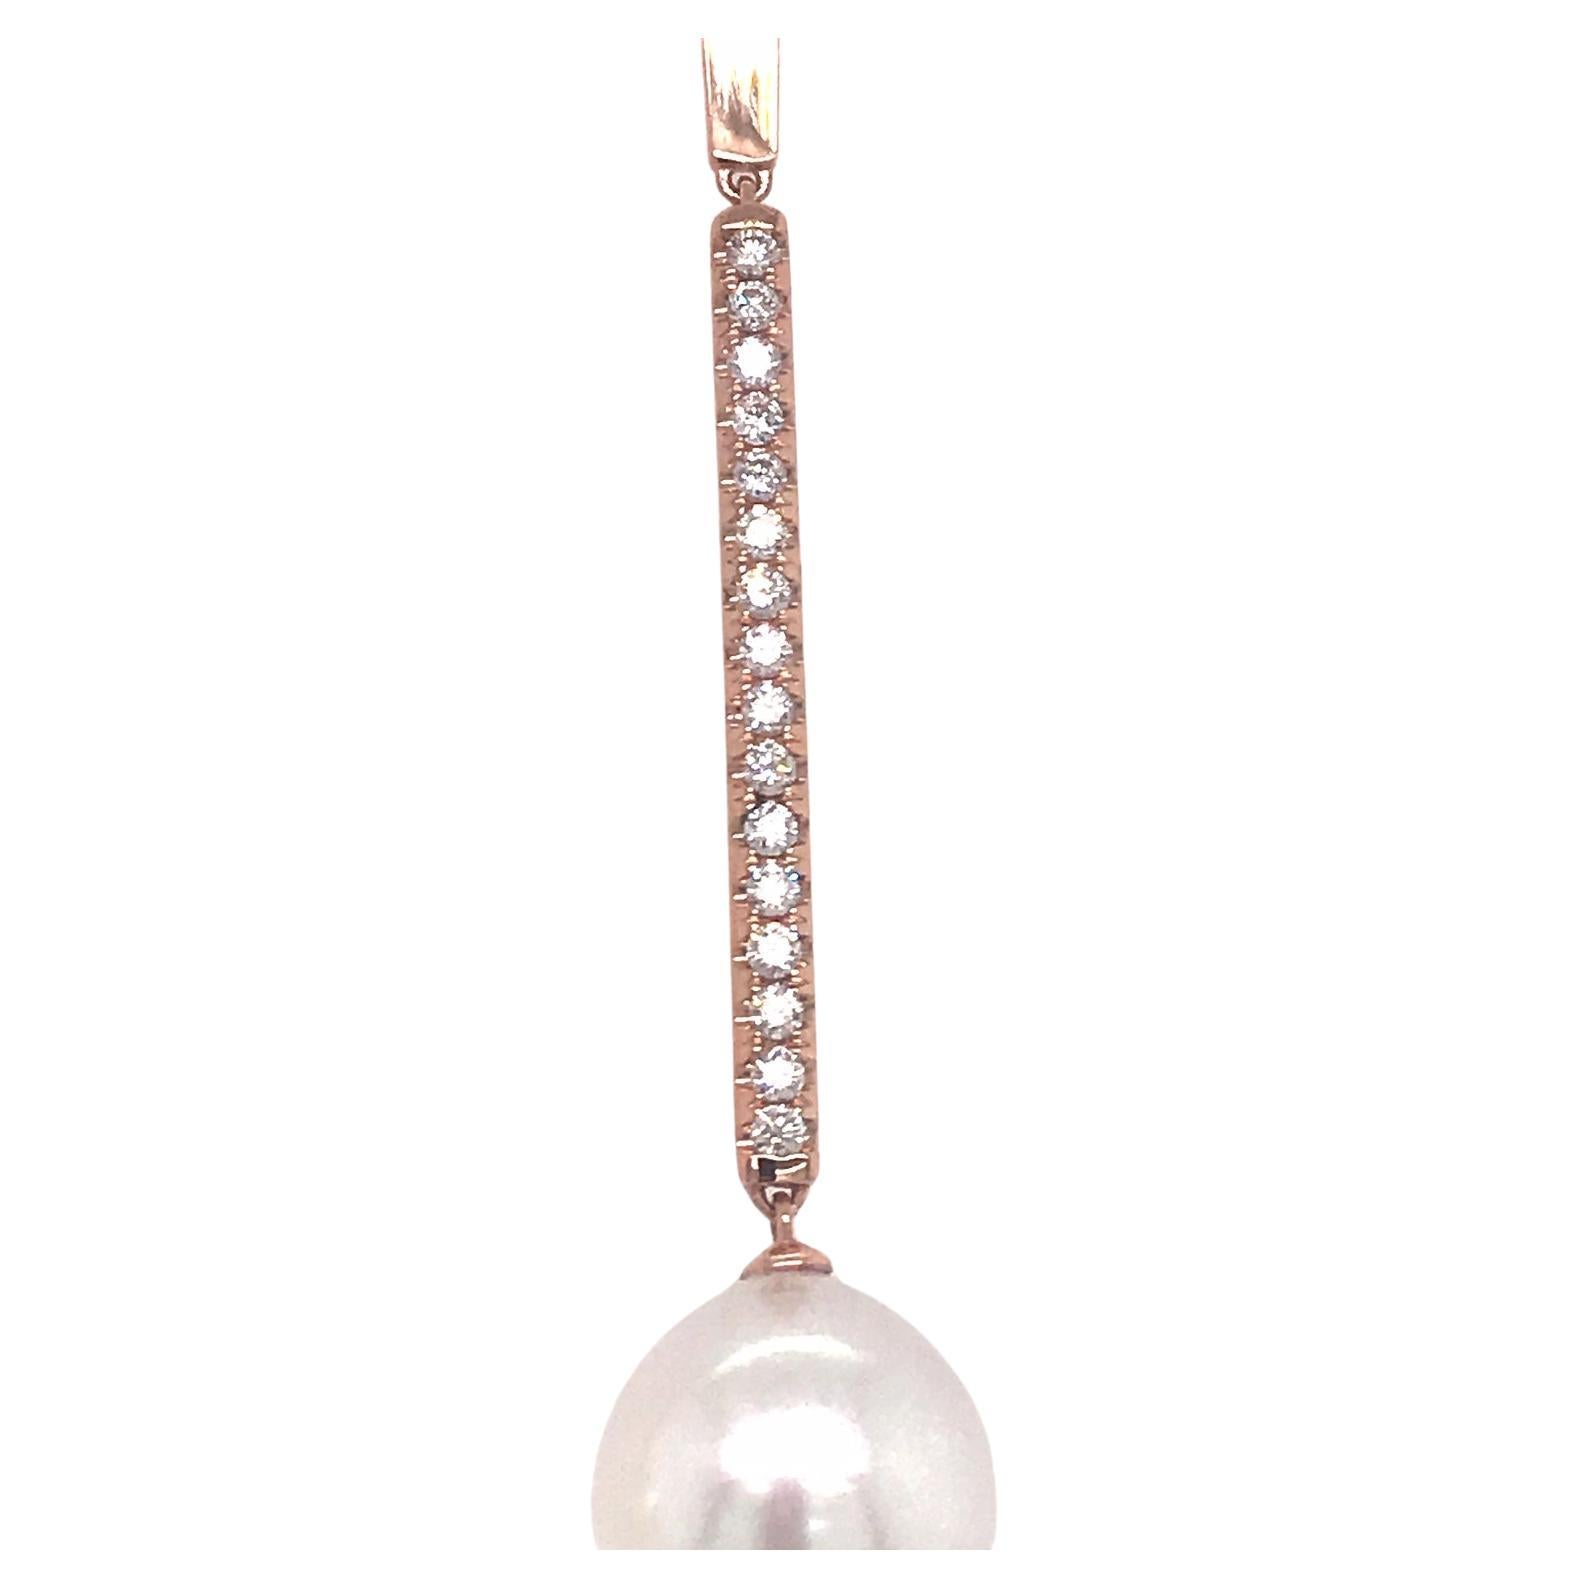 18K Rose gold drop earrings featuring two South Sea pearls measuring 12-13 mm with a diamond bar containing 32 round brilliants weighing 0.63 carats.
Color G-H
Clarity SI
Comes in White Gold

Measurements:
South Sea Pearl: 12-13 MM
Diamond Bar: